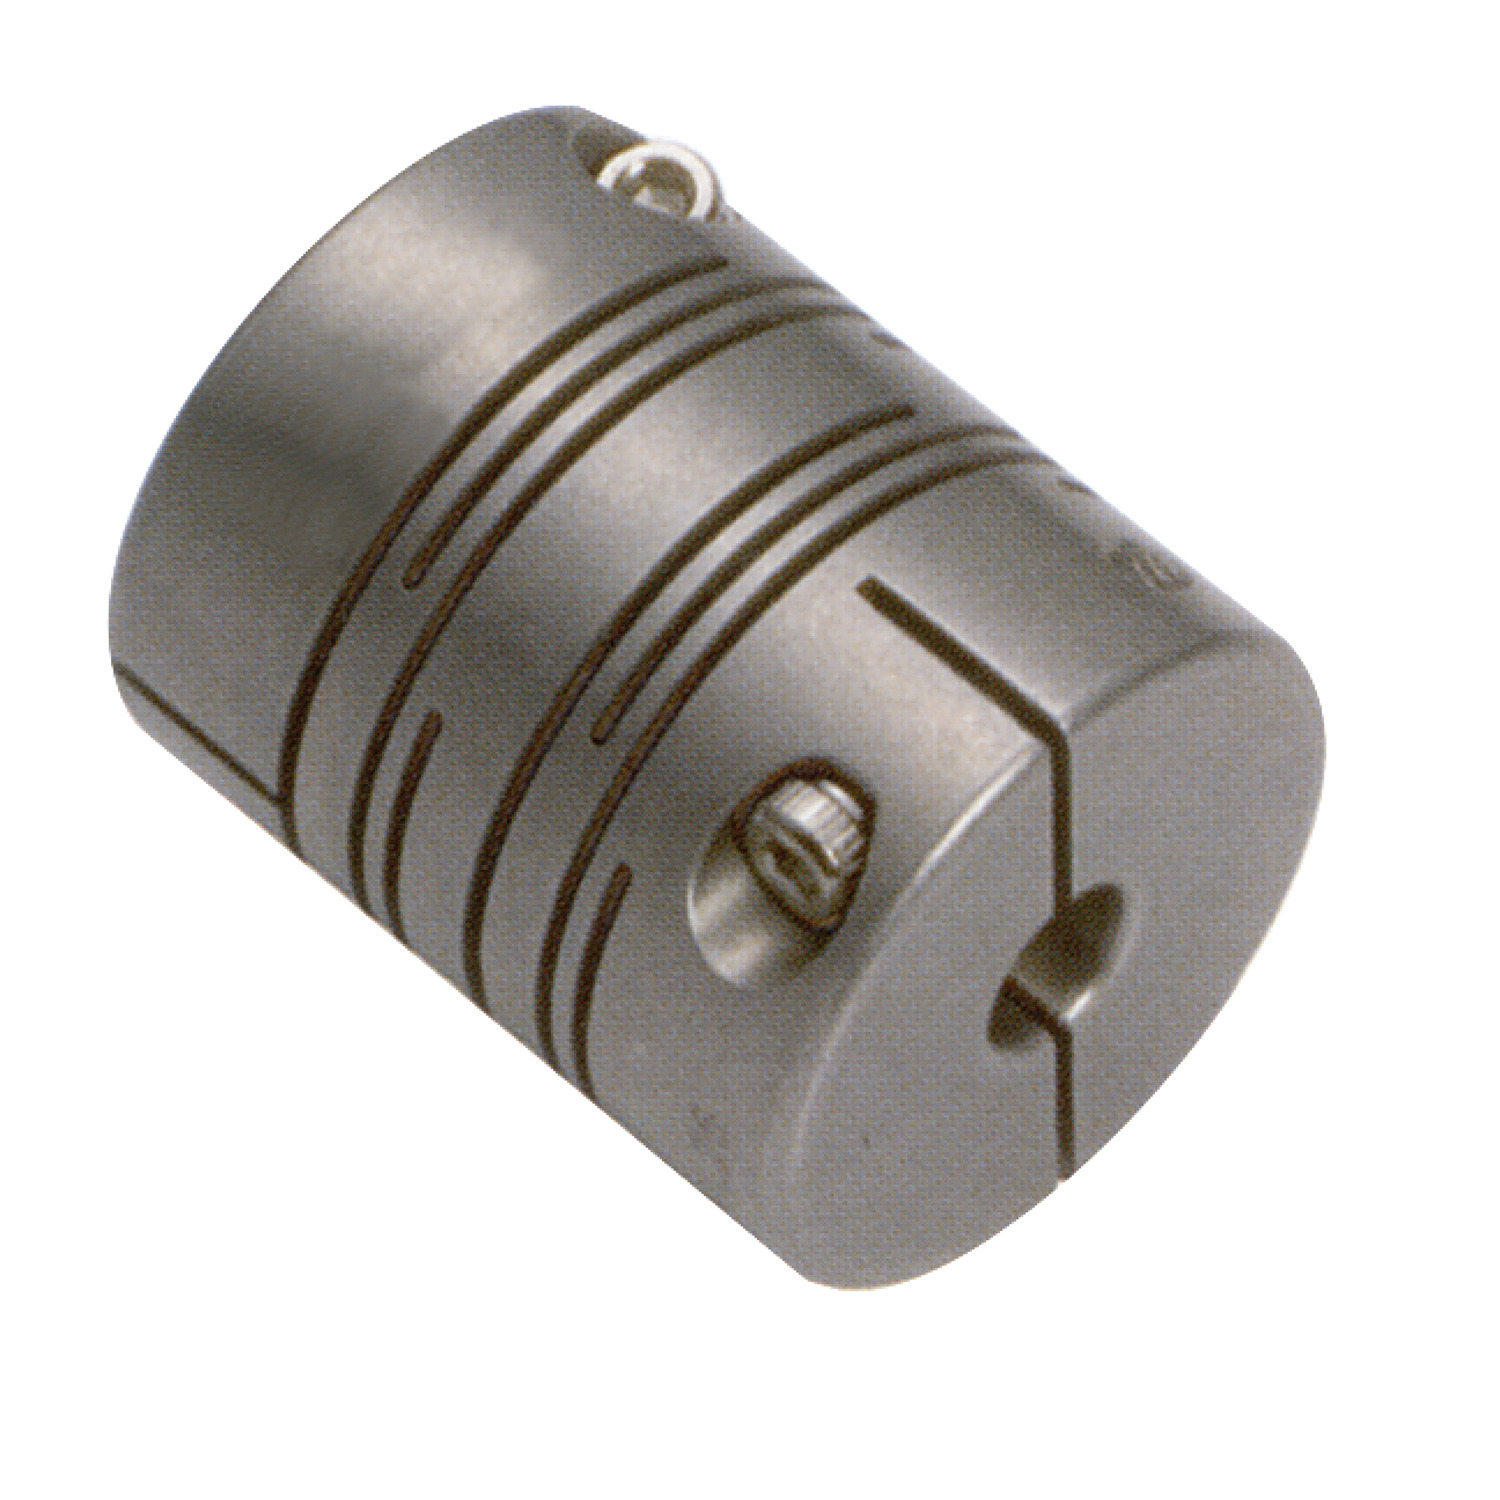 R3004.D-6-10 Spiral Beam Coupling - Stainless Steel 6 and 10mm bores - clamp type